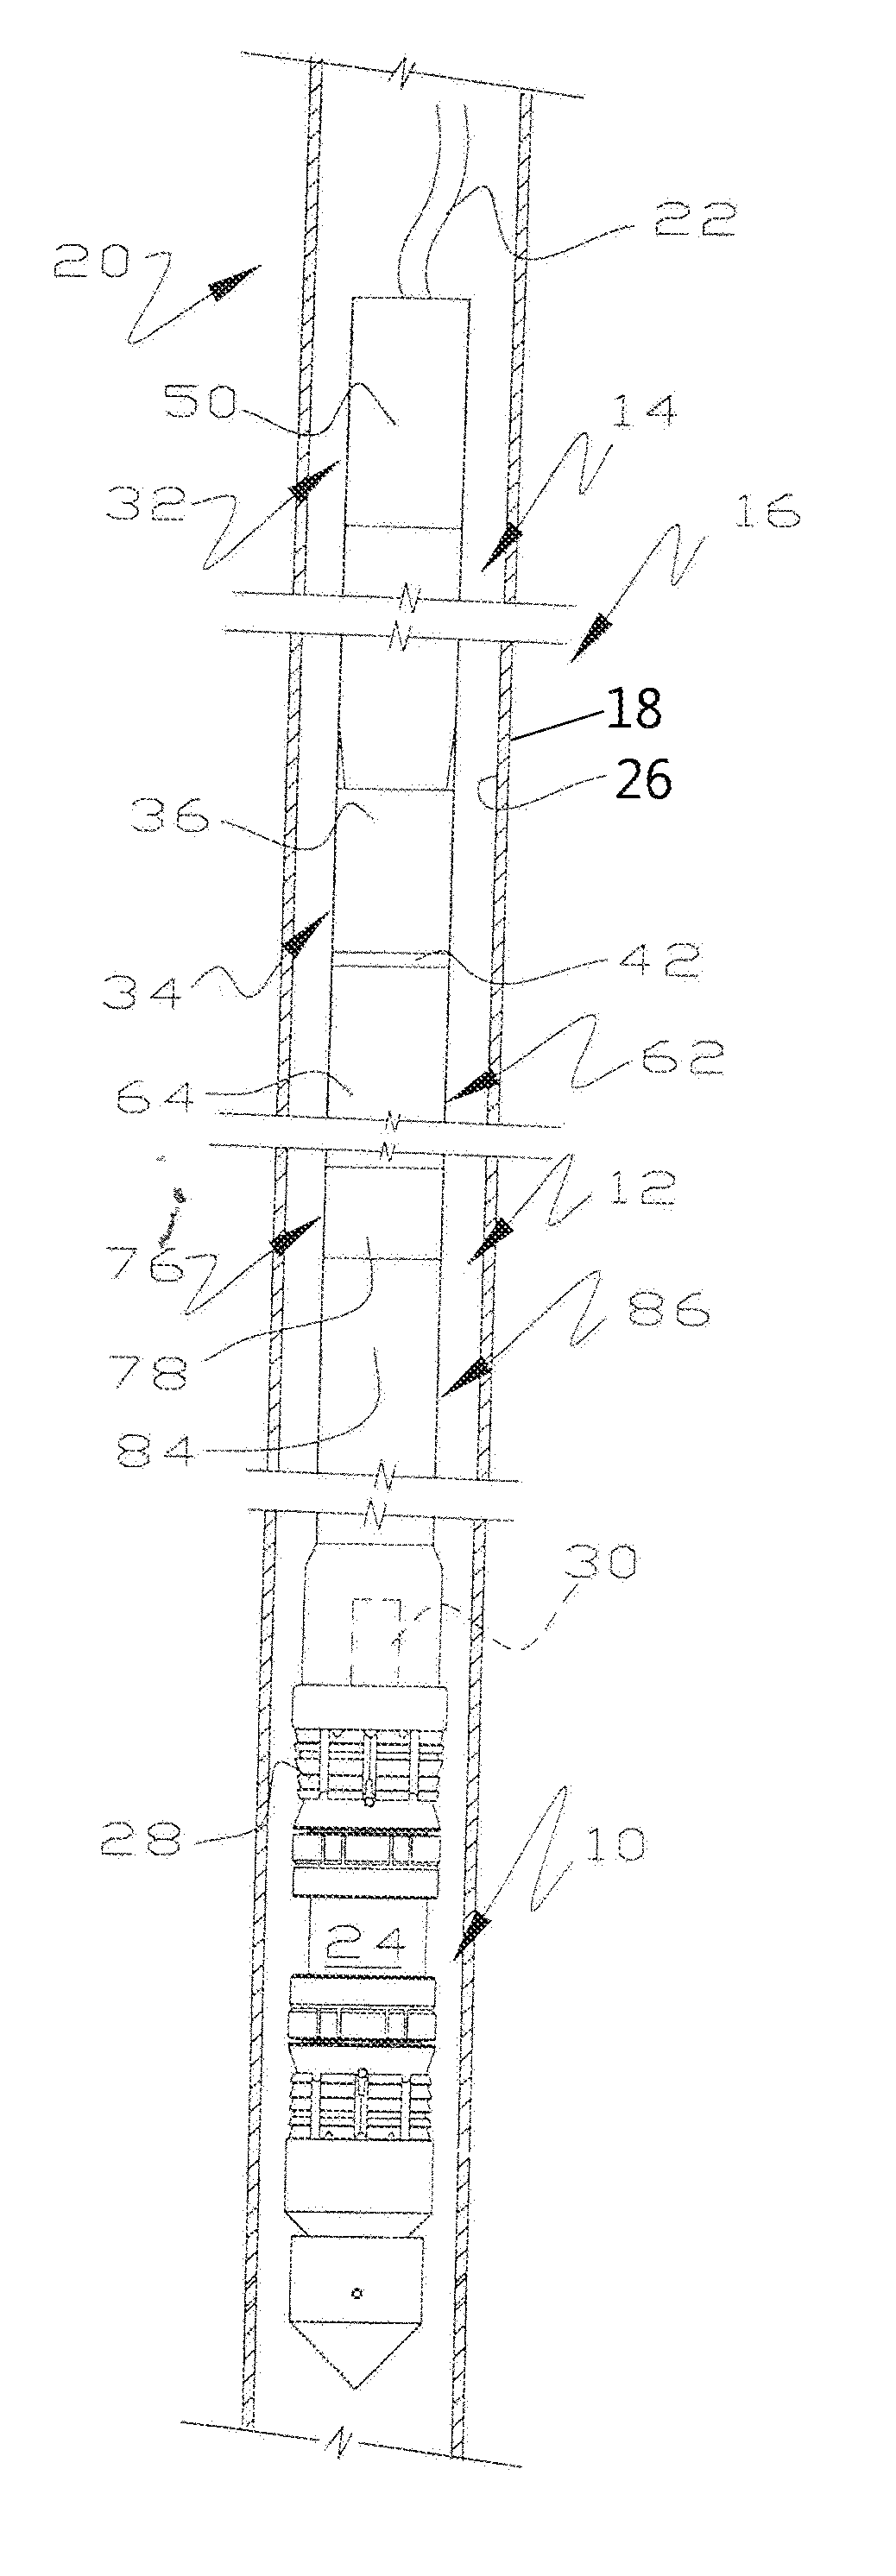 Electrically powered setting tool and perforating gun